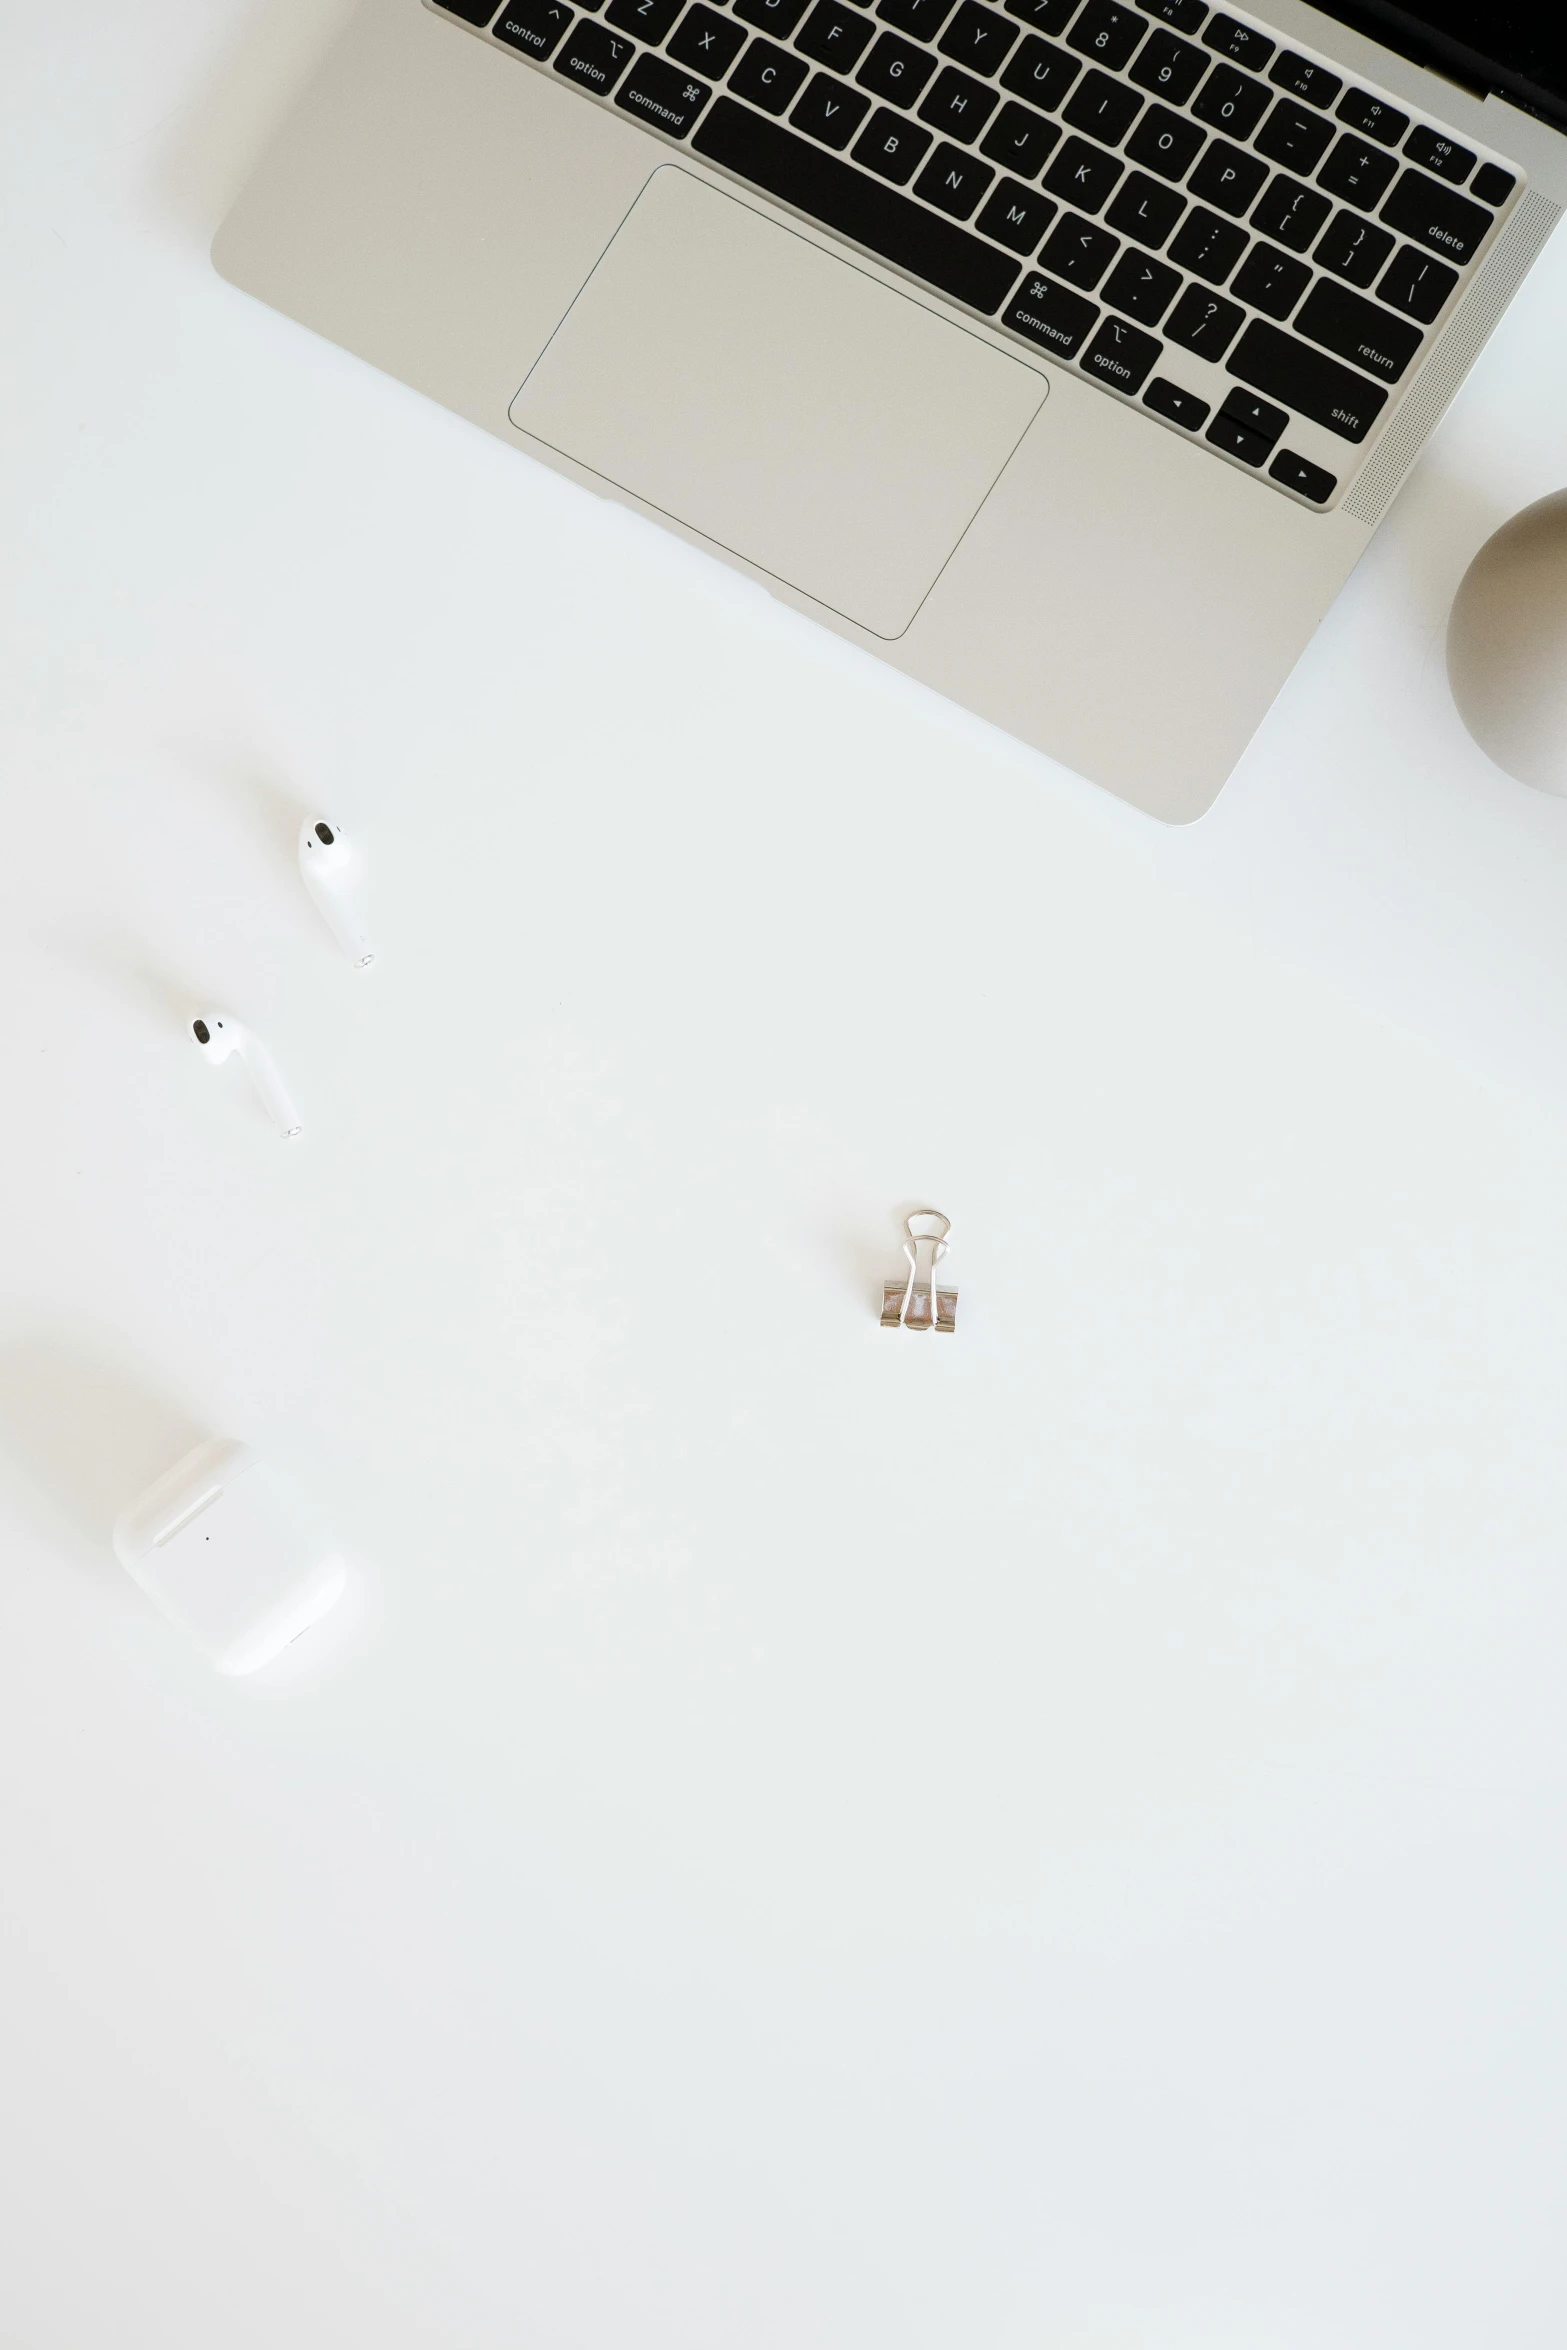 a laptop computer sitting on top of a white table, by Andries Stock, trending on unsplash, minimalism, bling earbuds, mini figure, vanilla, low quality photo